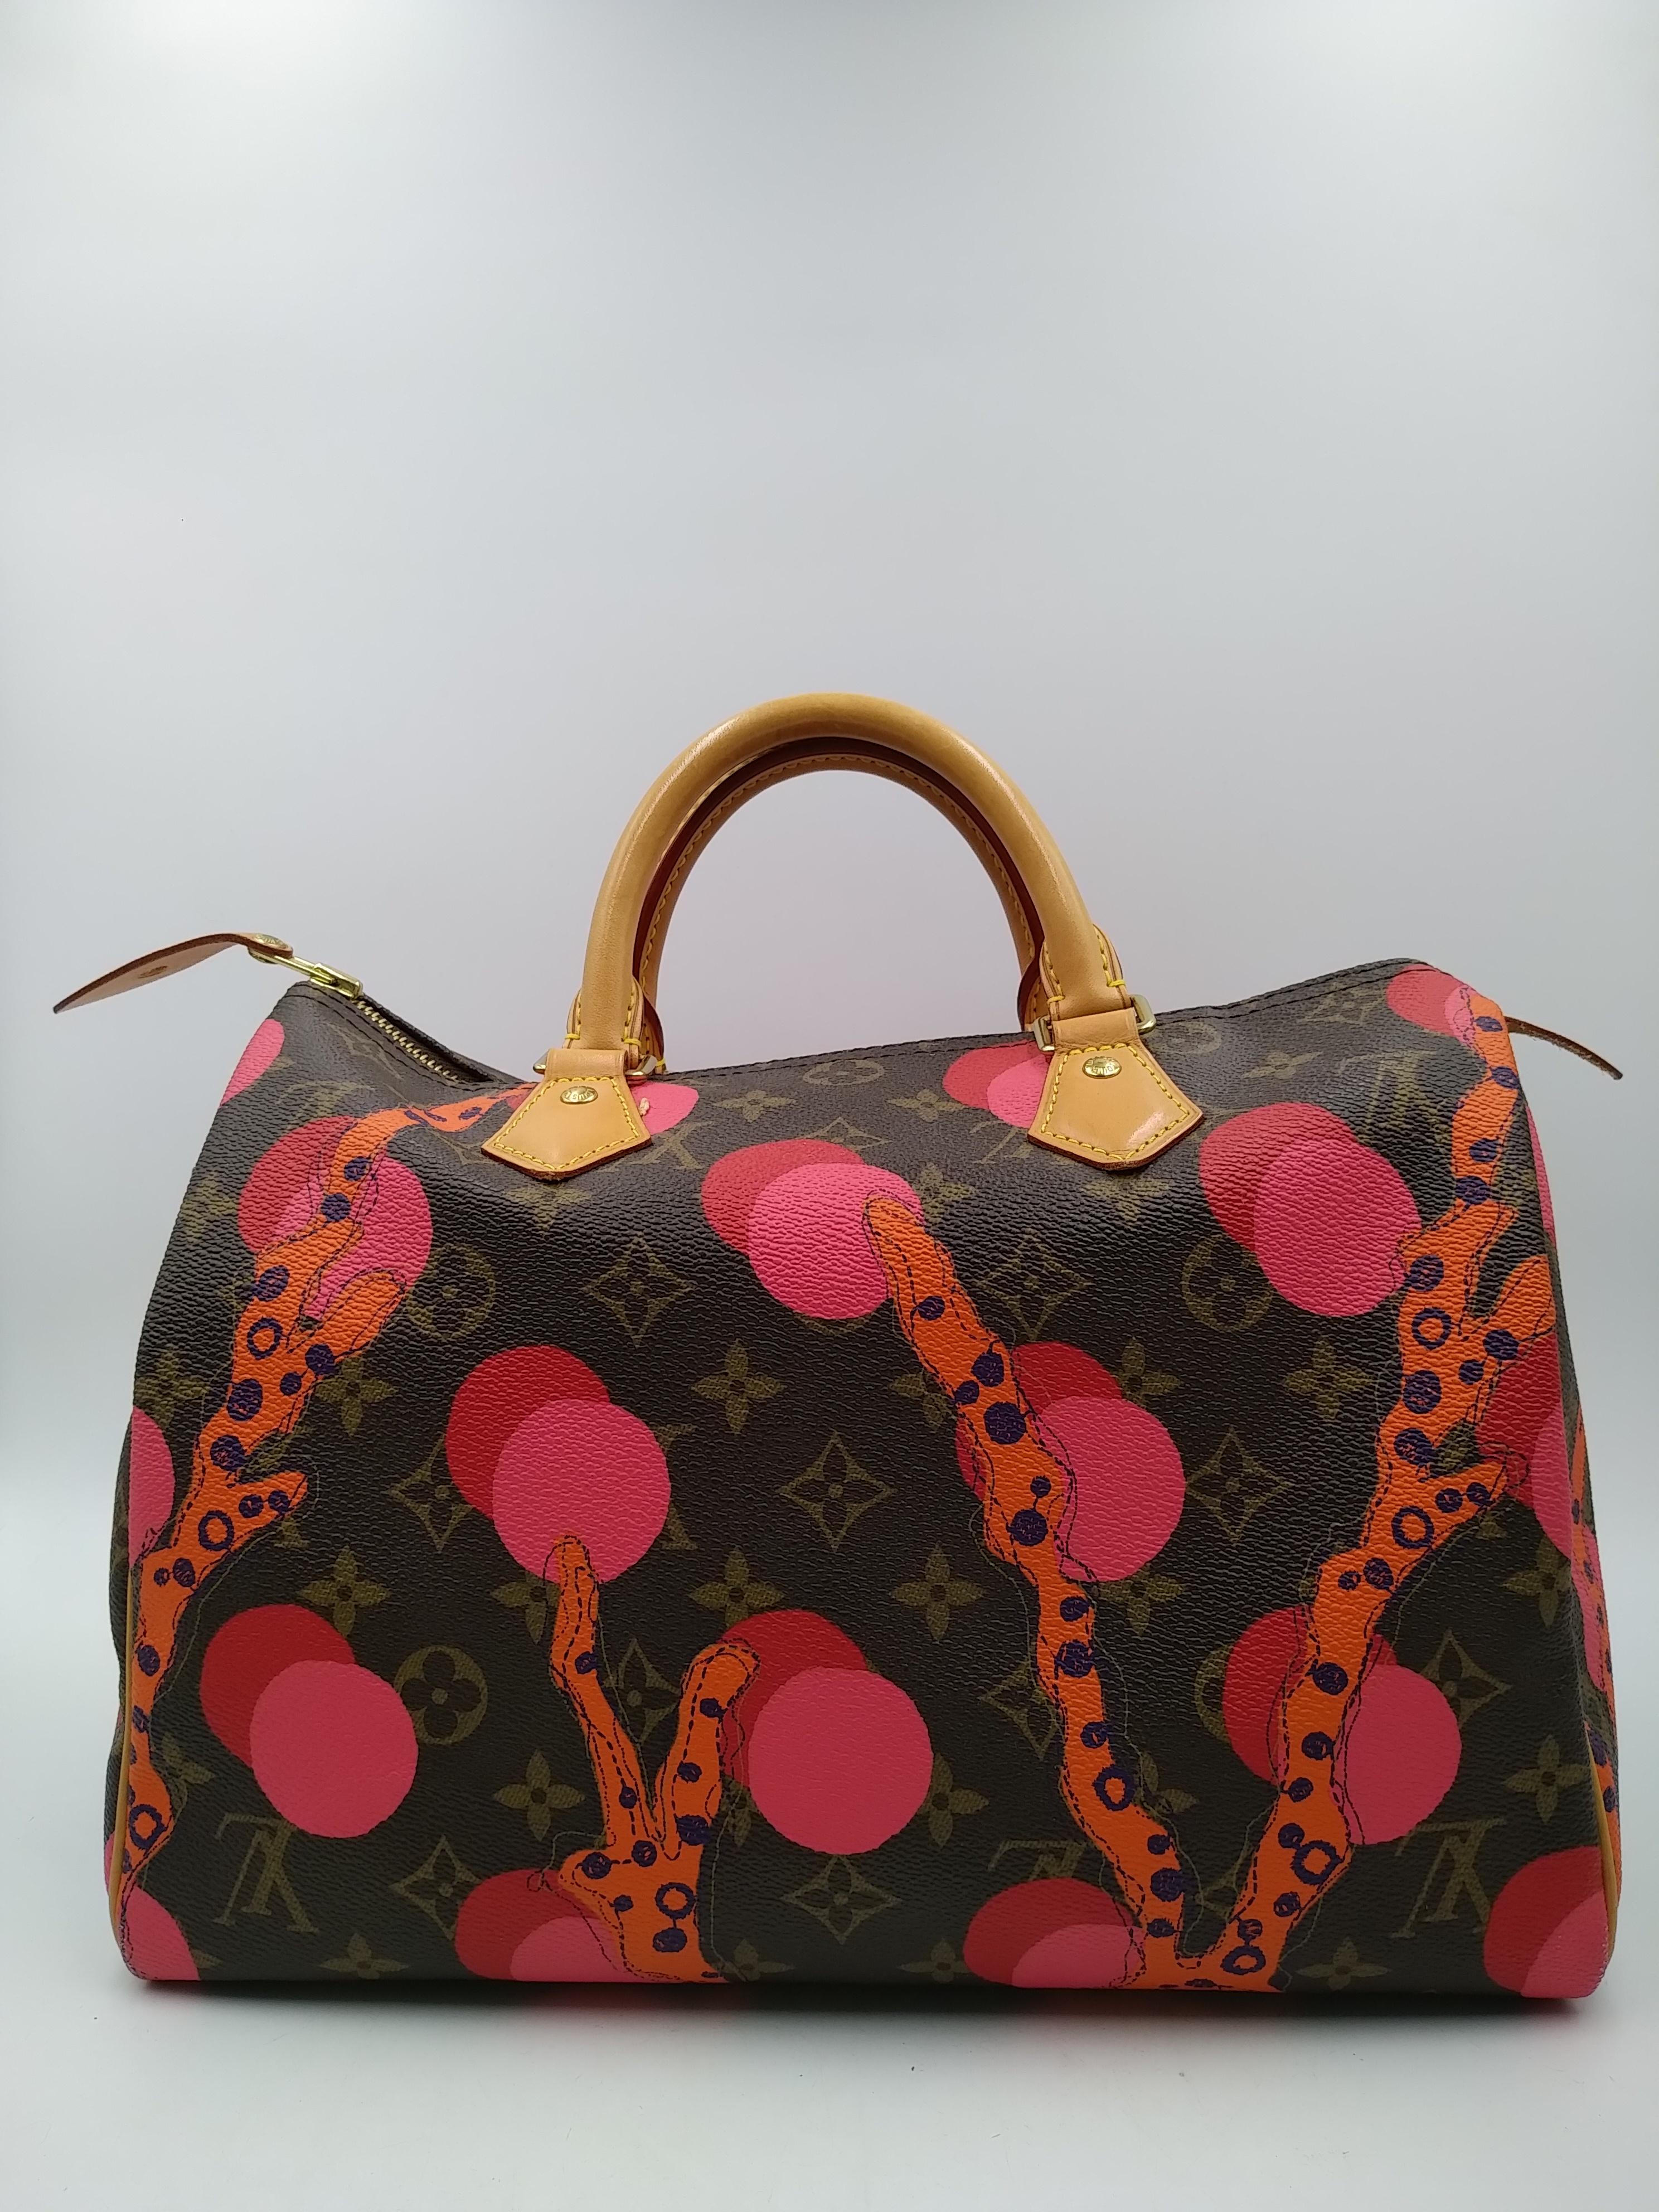 Louis Vuitton Limited Edition Ramages Grenada Speedy 30 bag. Inspired by the underwater world of coral, the Monogram Ramages collection for summer 2015 features bold screen-printed polka dots and coral in Grenade on the iconic Monogram canvas.
-100%